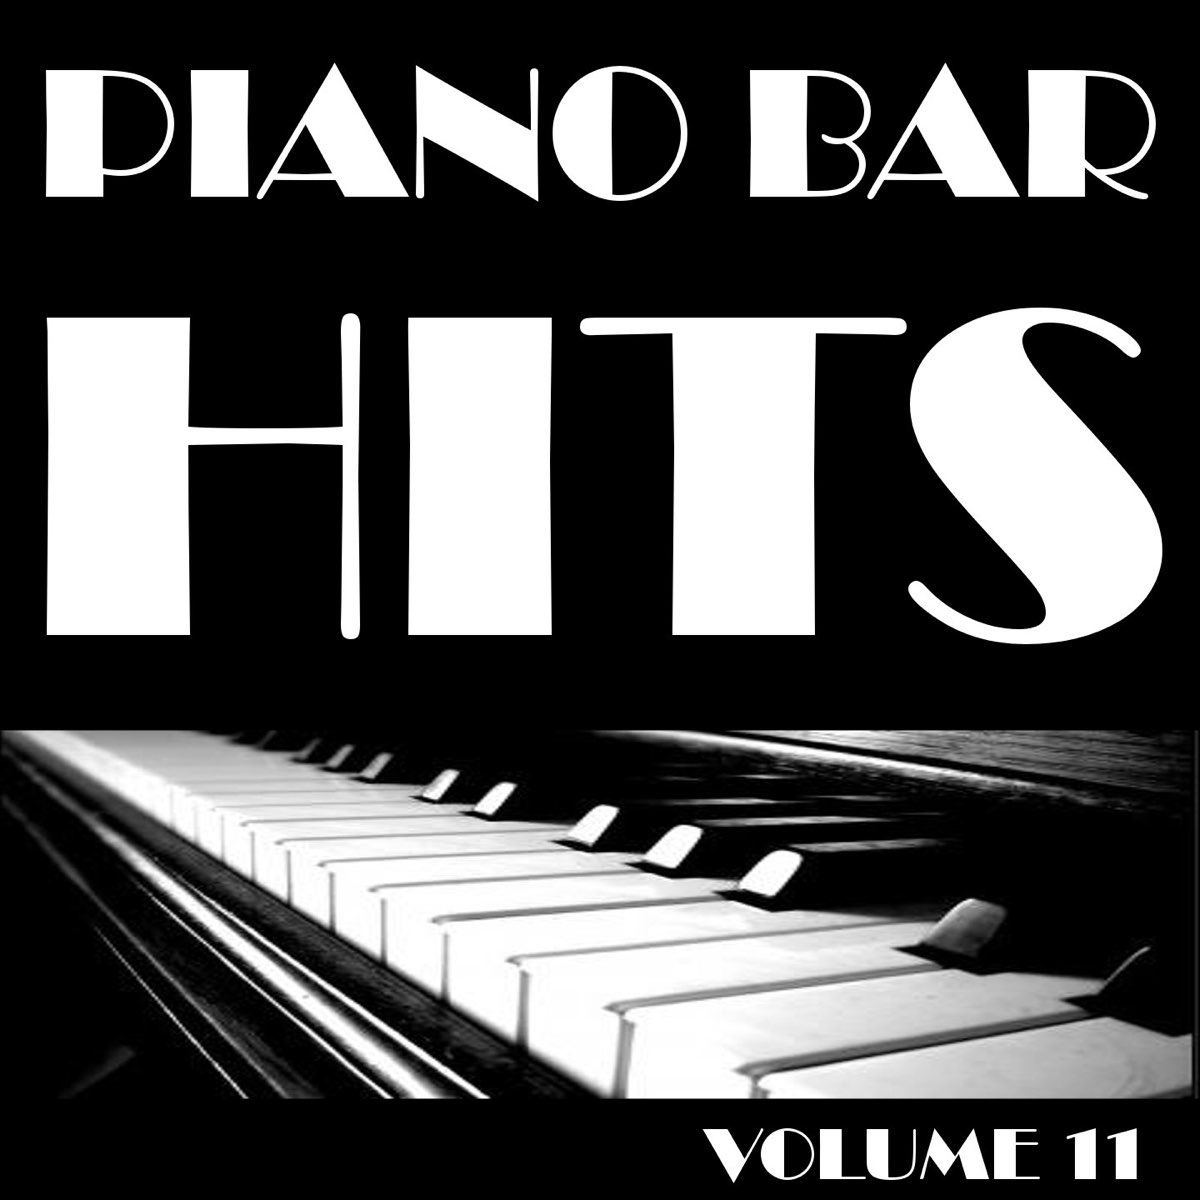 Piano Bar Hits, Vol. 11 - Album by Jean Paques - Apple Music